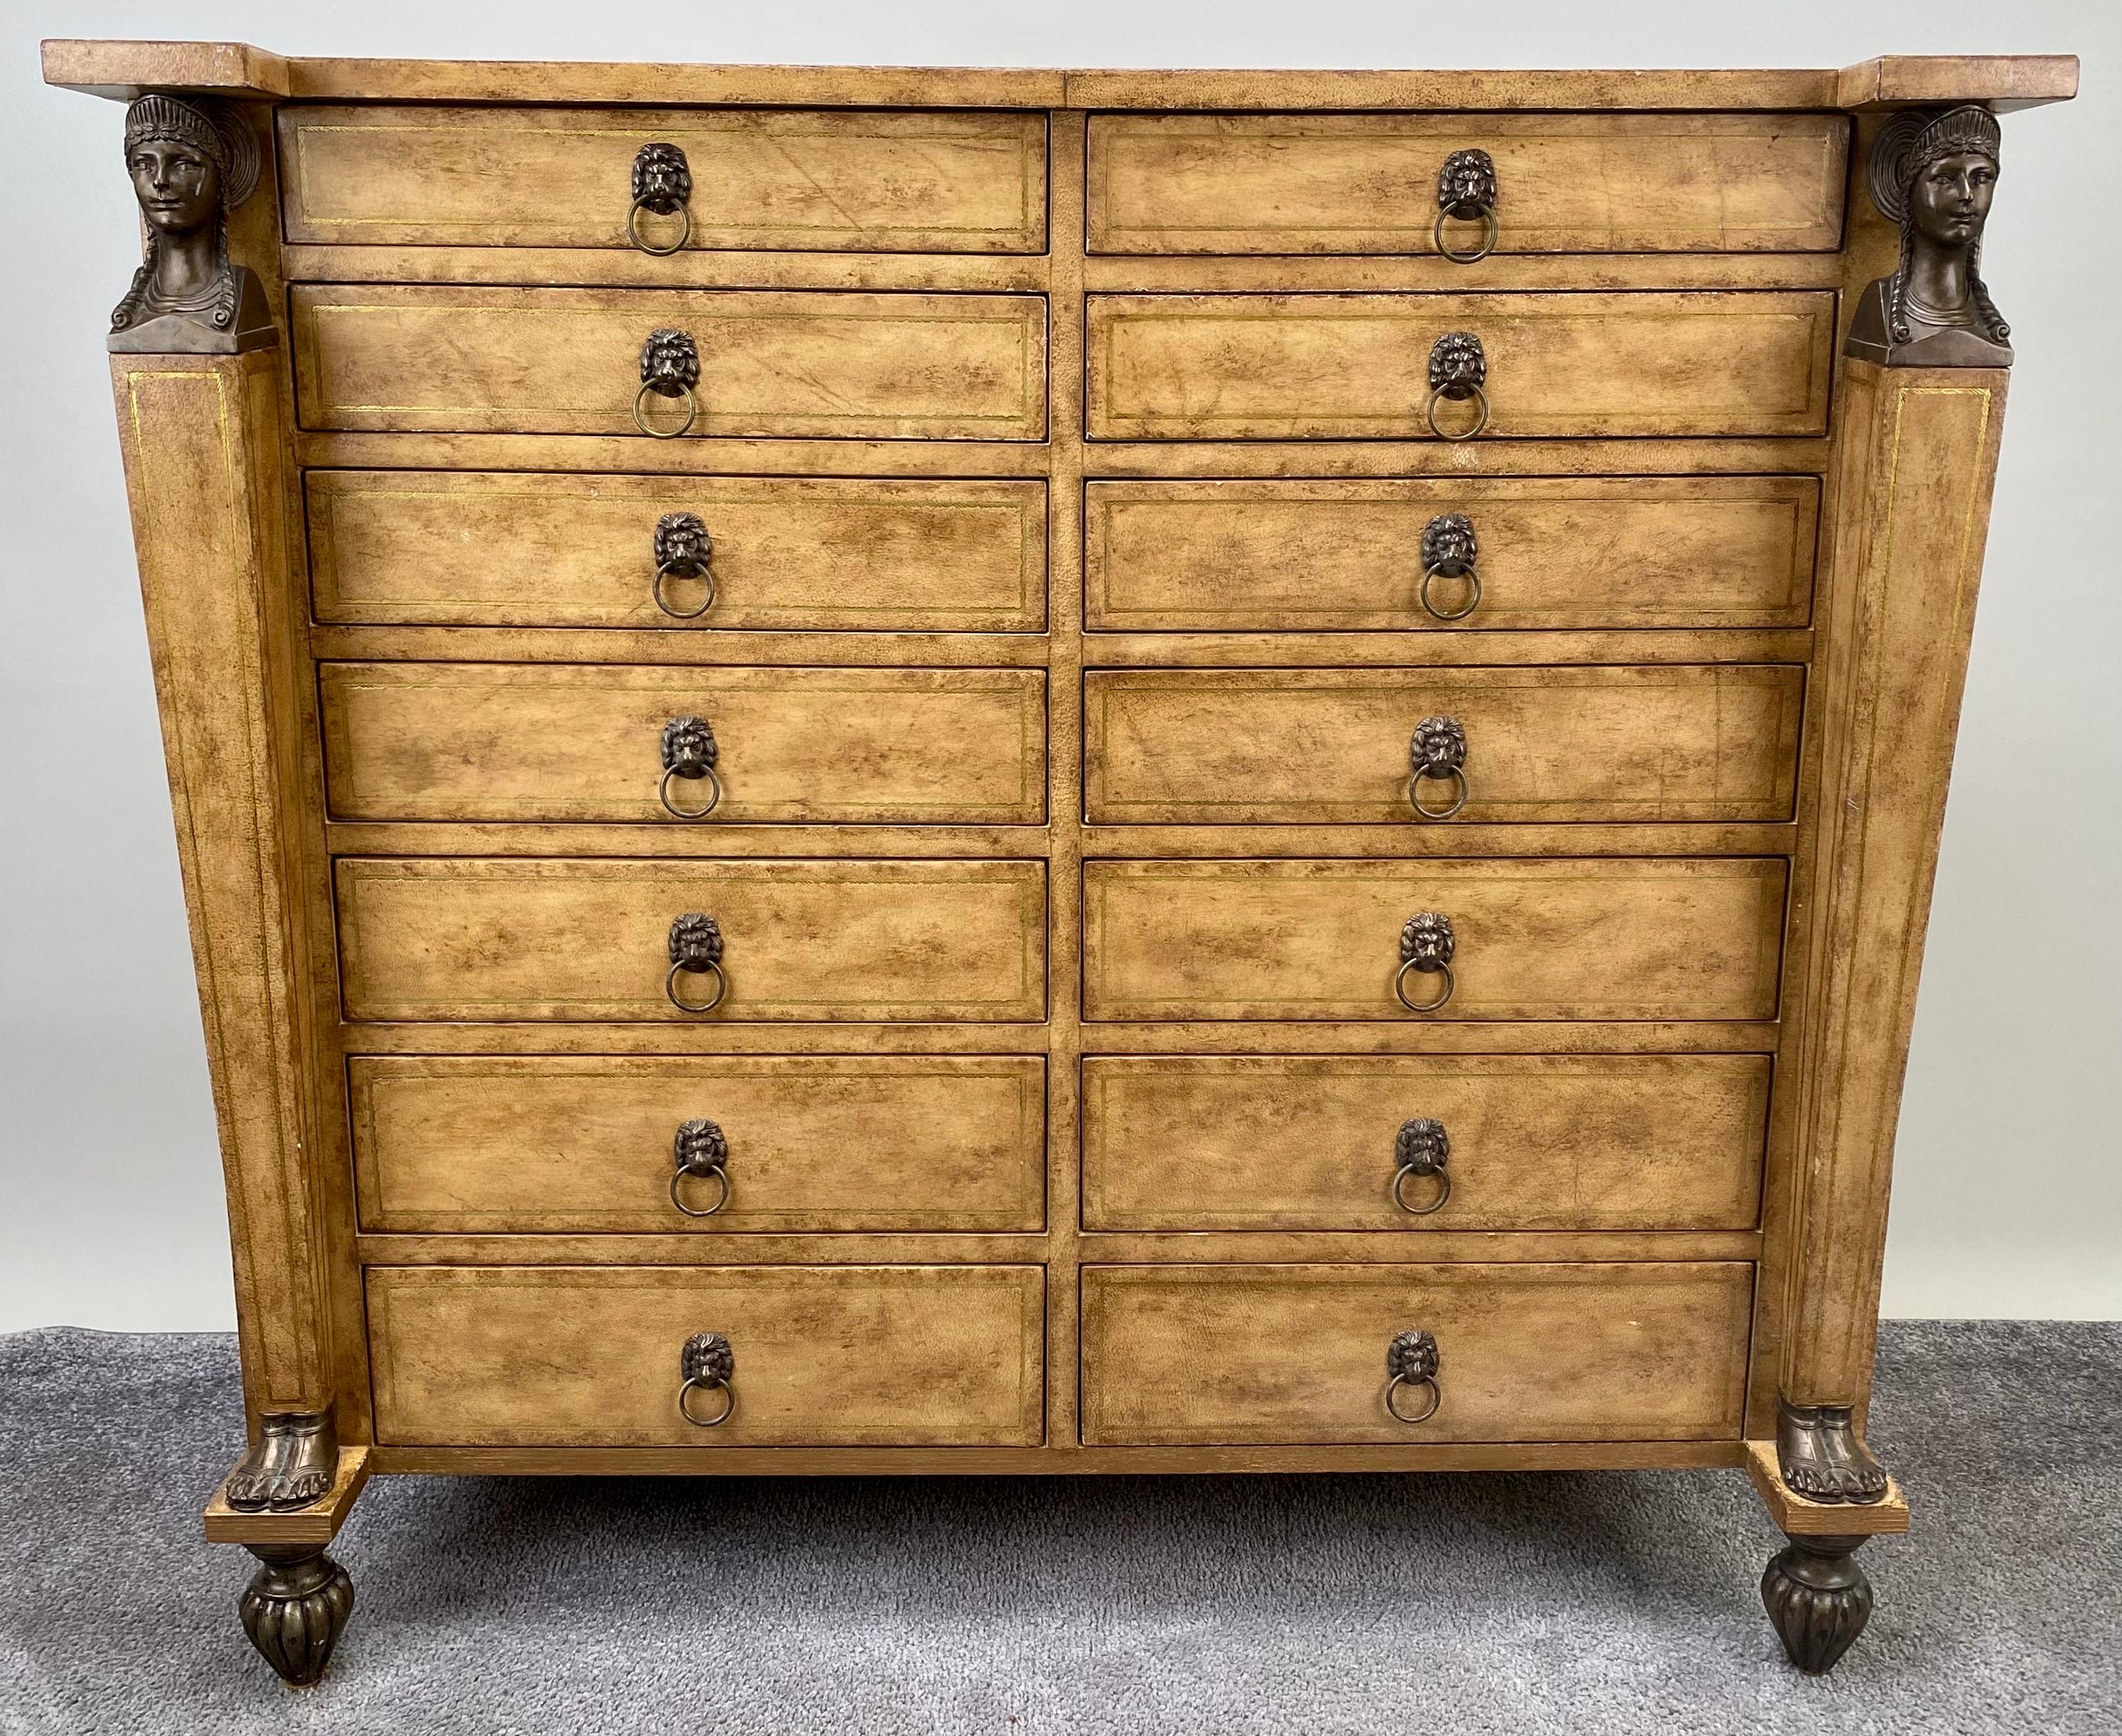 A federal style apothecary cabinet by the e luxury manufacturer, Kreiss. Handcrafted with precision in the Philippines, this remarkable piece showcases the meticulous artistry and attention to detail that defines Kreiss craftsmanship.  Fashioned